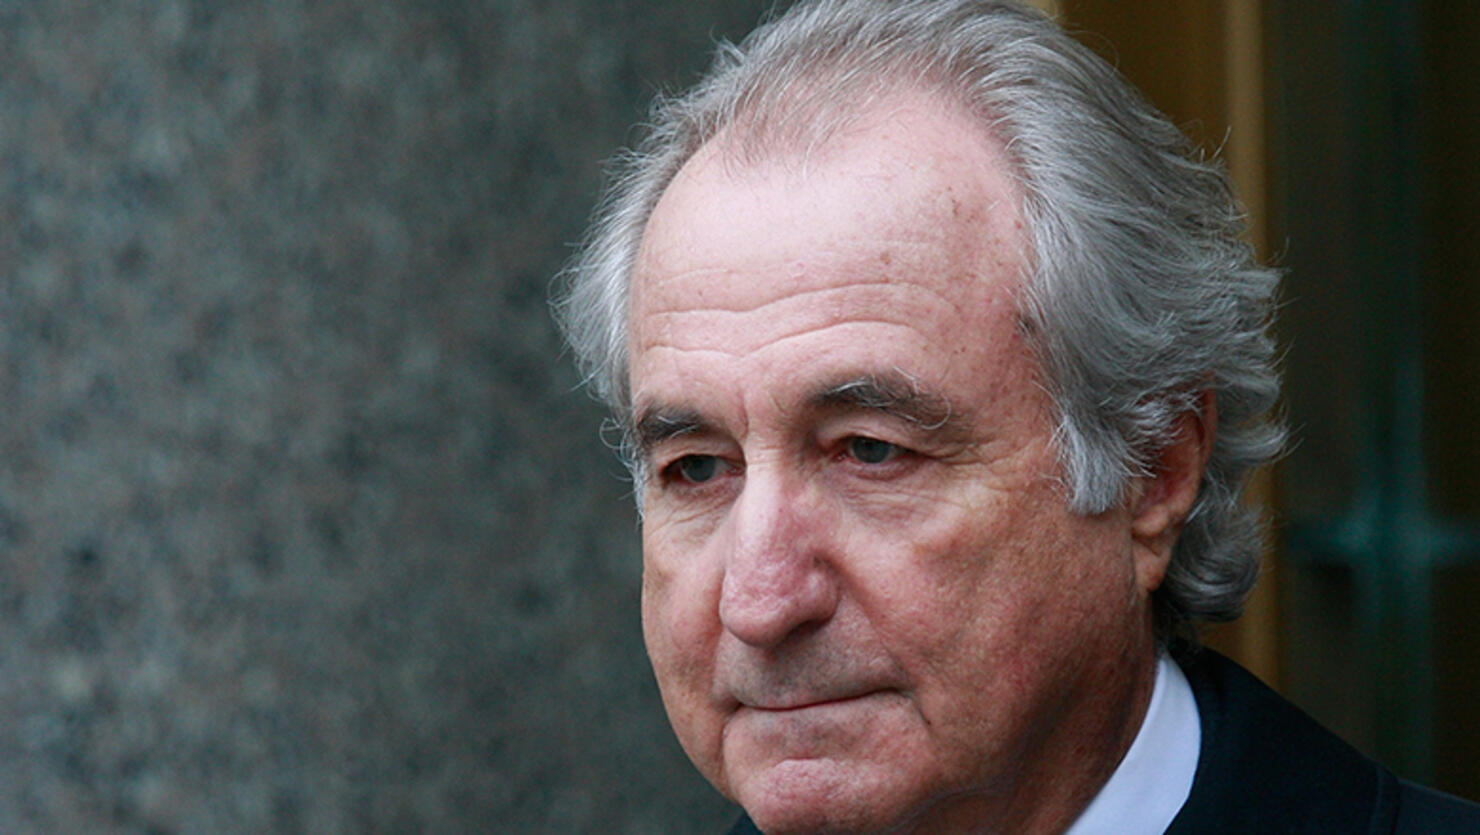 Madoff Attends Court Hearing On His Legal Representation